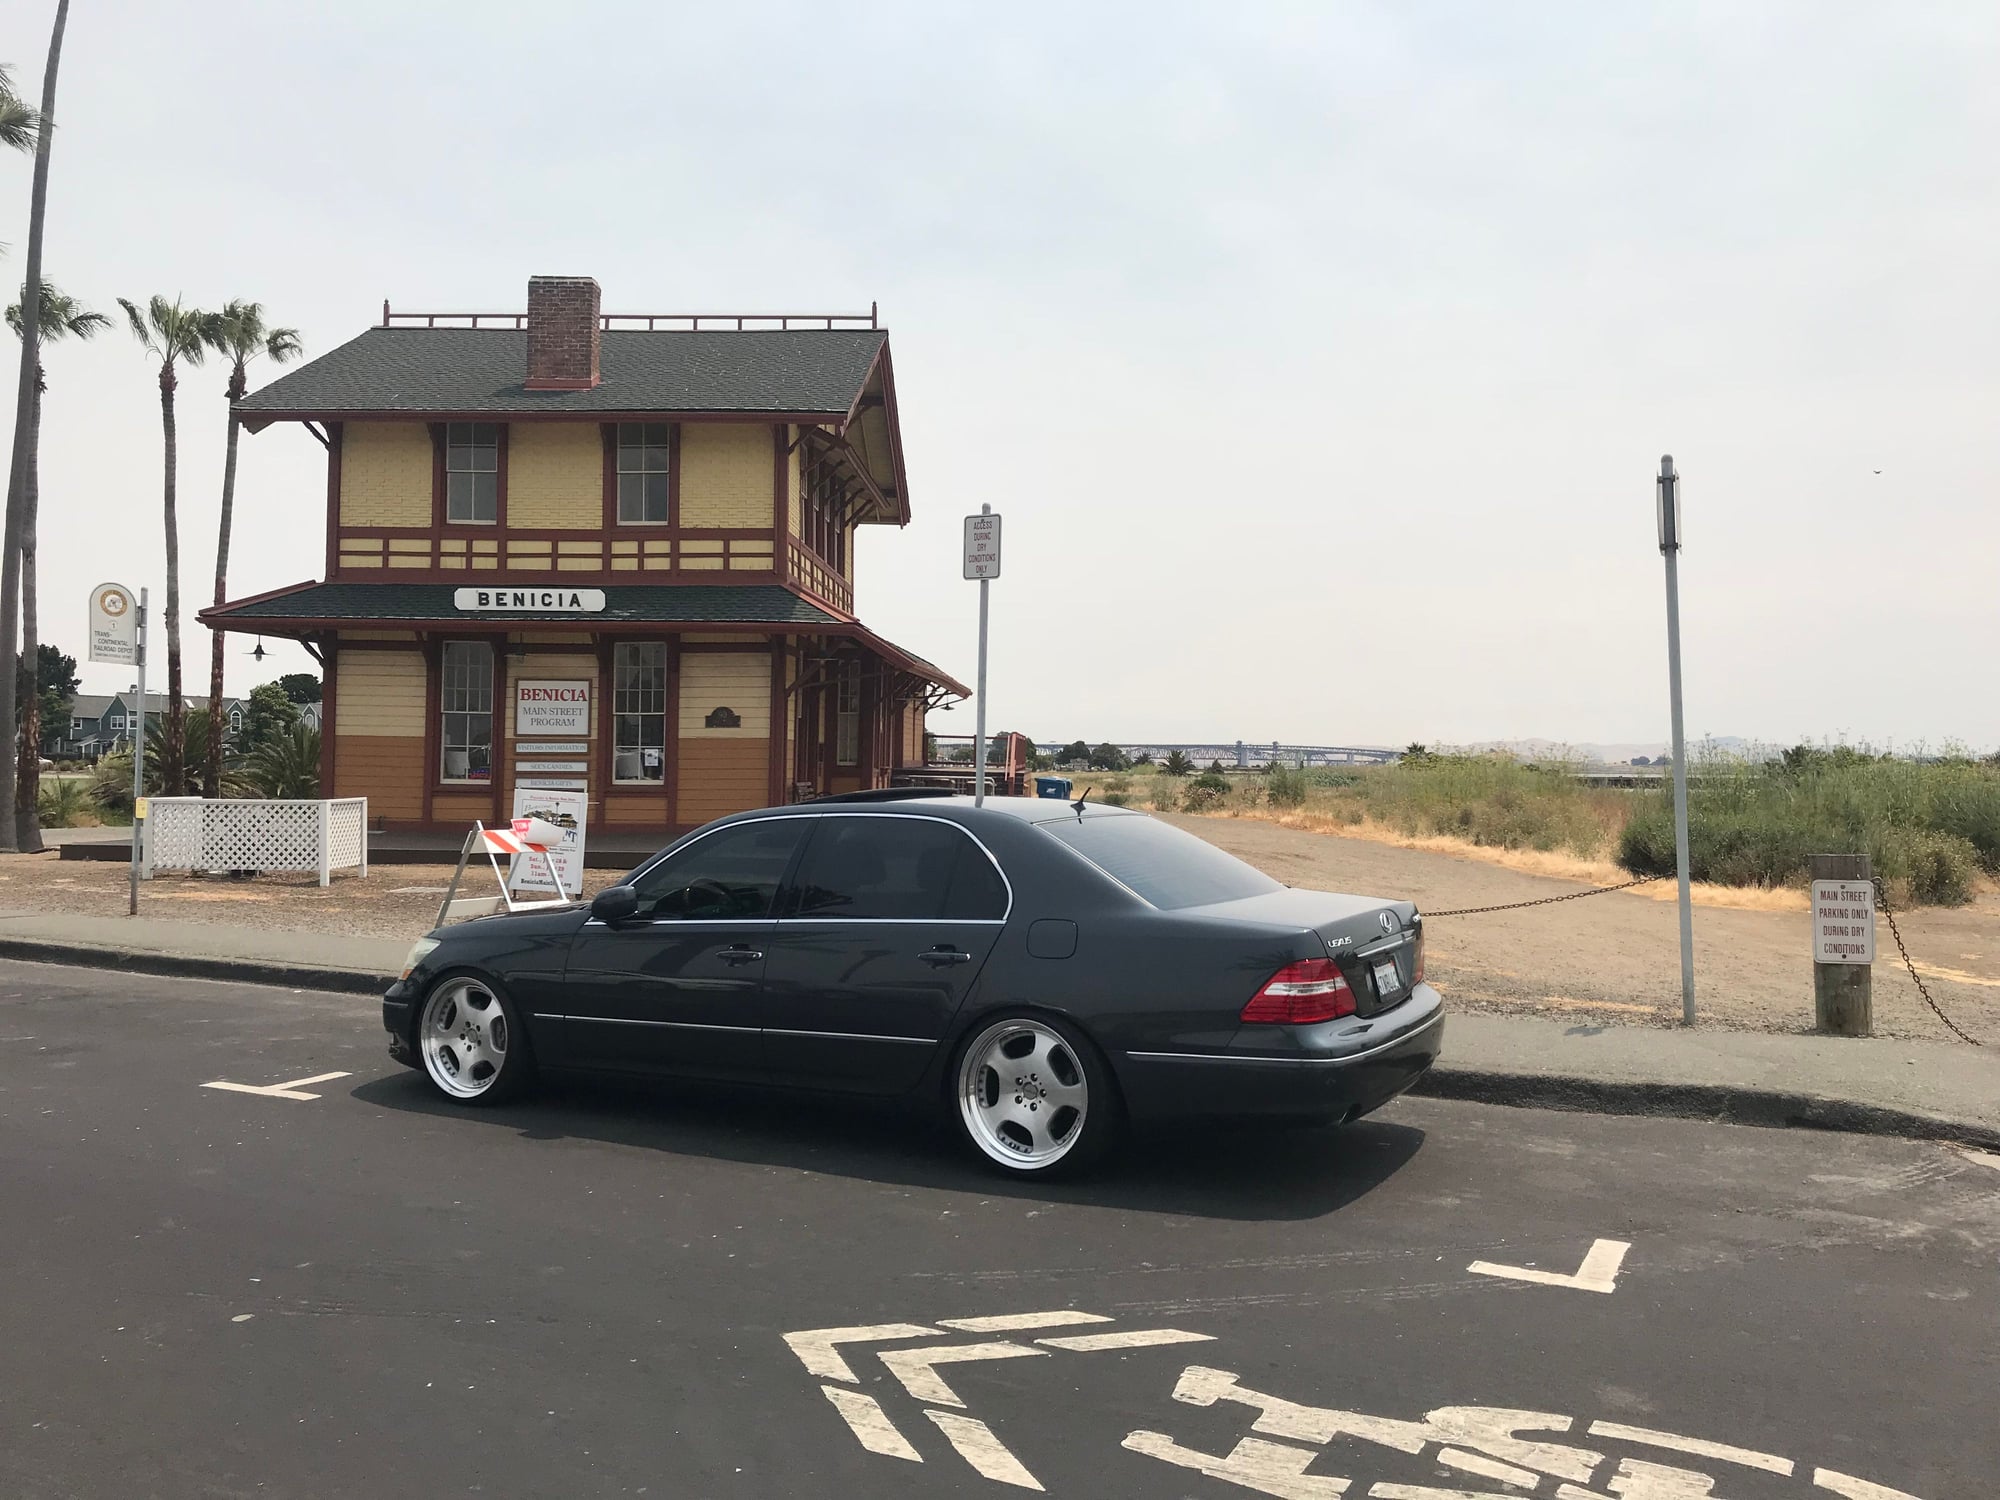 2005 Lexus LS430 - 2005 Lexus LS430 on BC coilovers - Used - VIN JTHBN36F950176929 - 179,000 Miles - 8 cyl - 2WD - Automatic - Sedan - Gray - Vallejo, CA 94591, United States